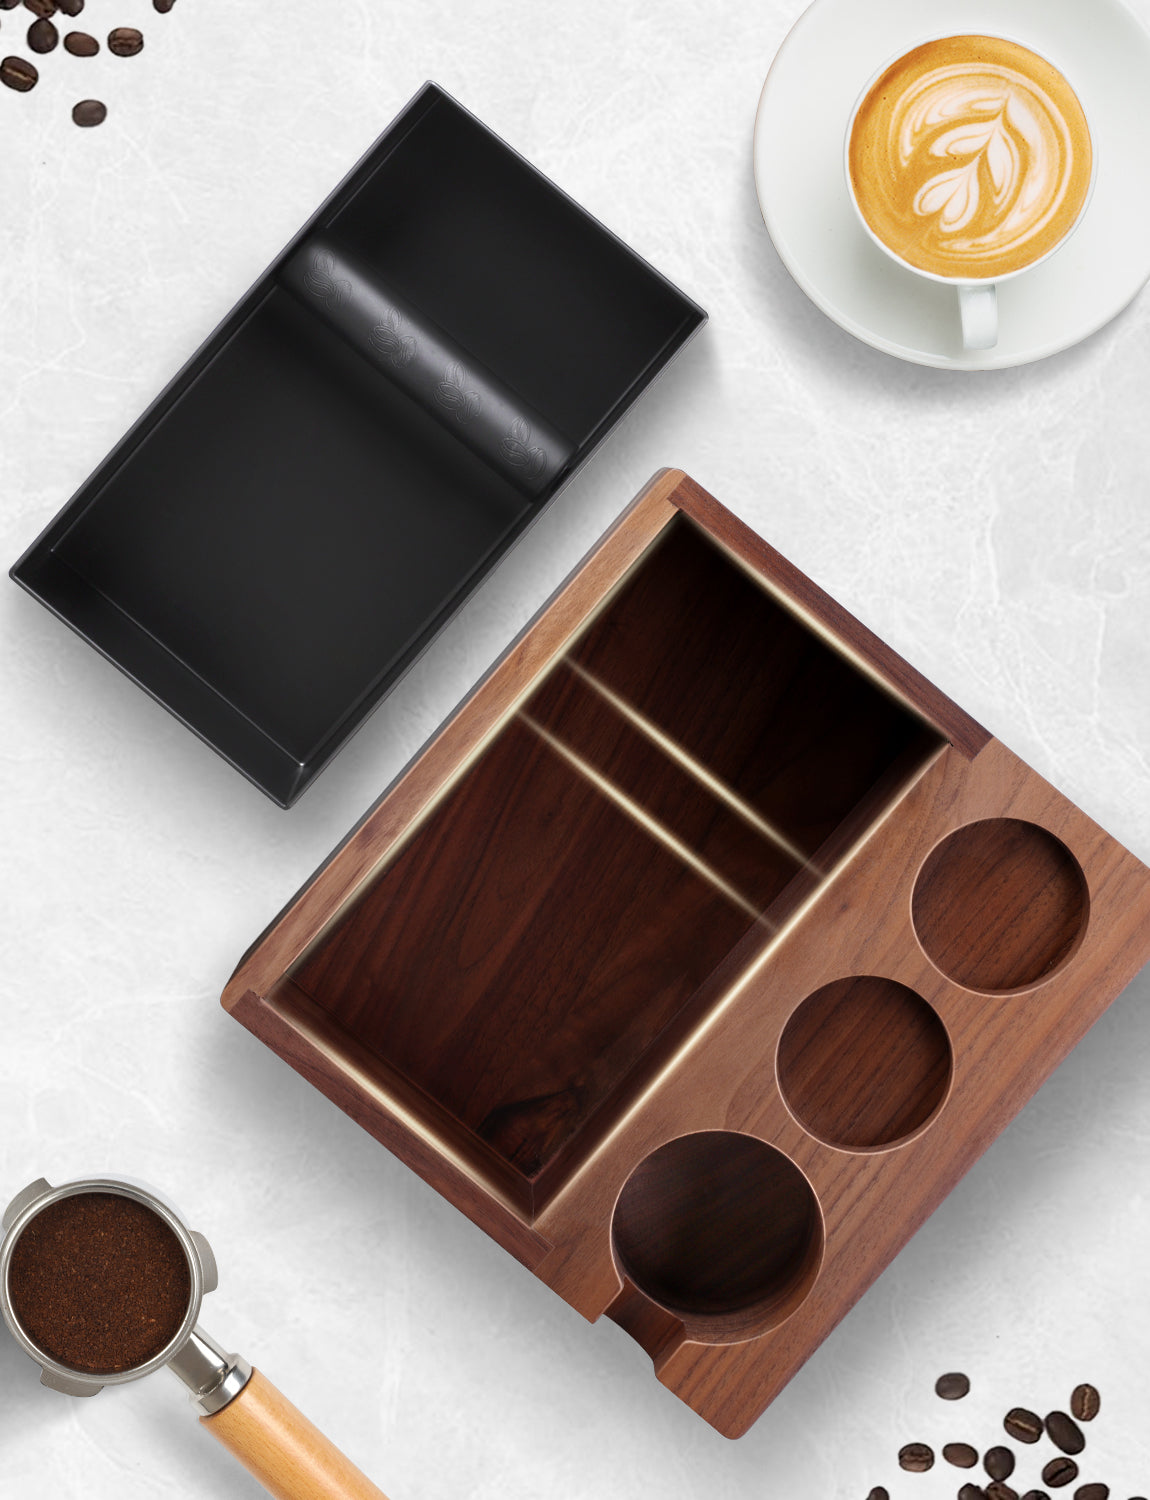 Laekerrt Espresso Tamping Station with Removable Metal Knock Box, Tamper and Distributor Tamping Base, Natural Walnut Wood Coffee Station, Fits All Espresso 51mm-58mm Accessories, Non-Slip 4 In 1